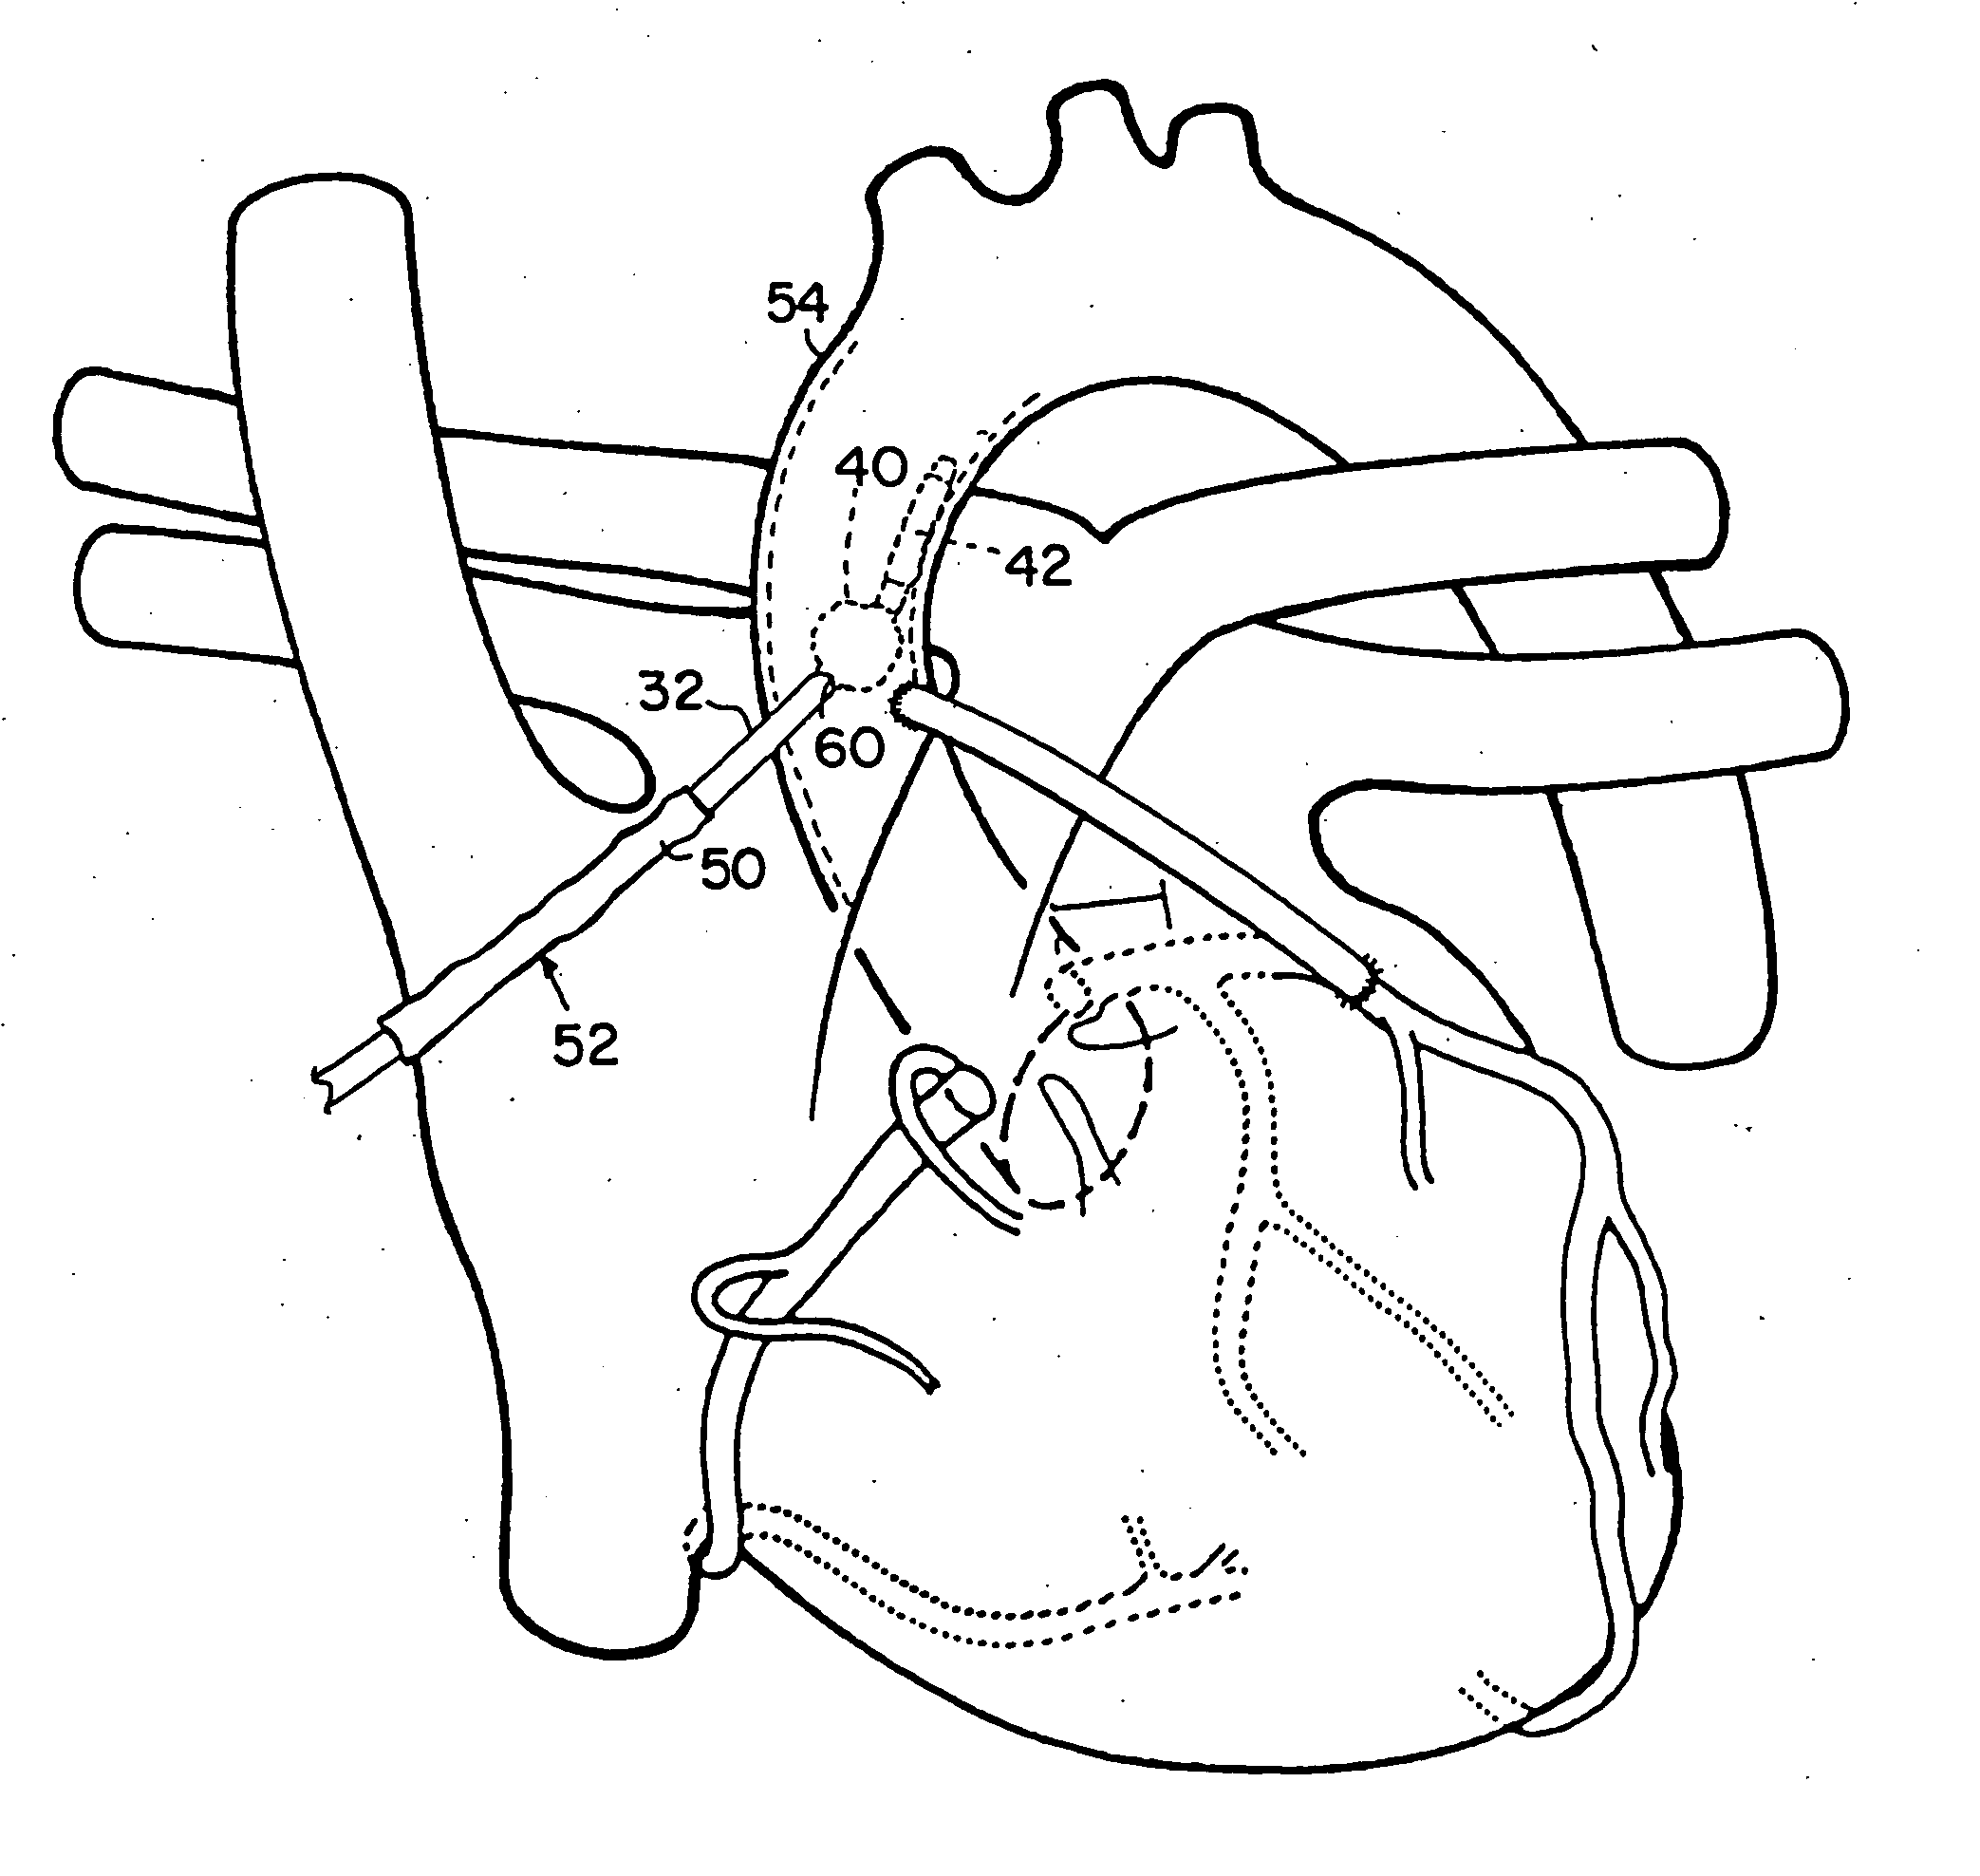 Intravascular balloon occlusion device and method for using the same